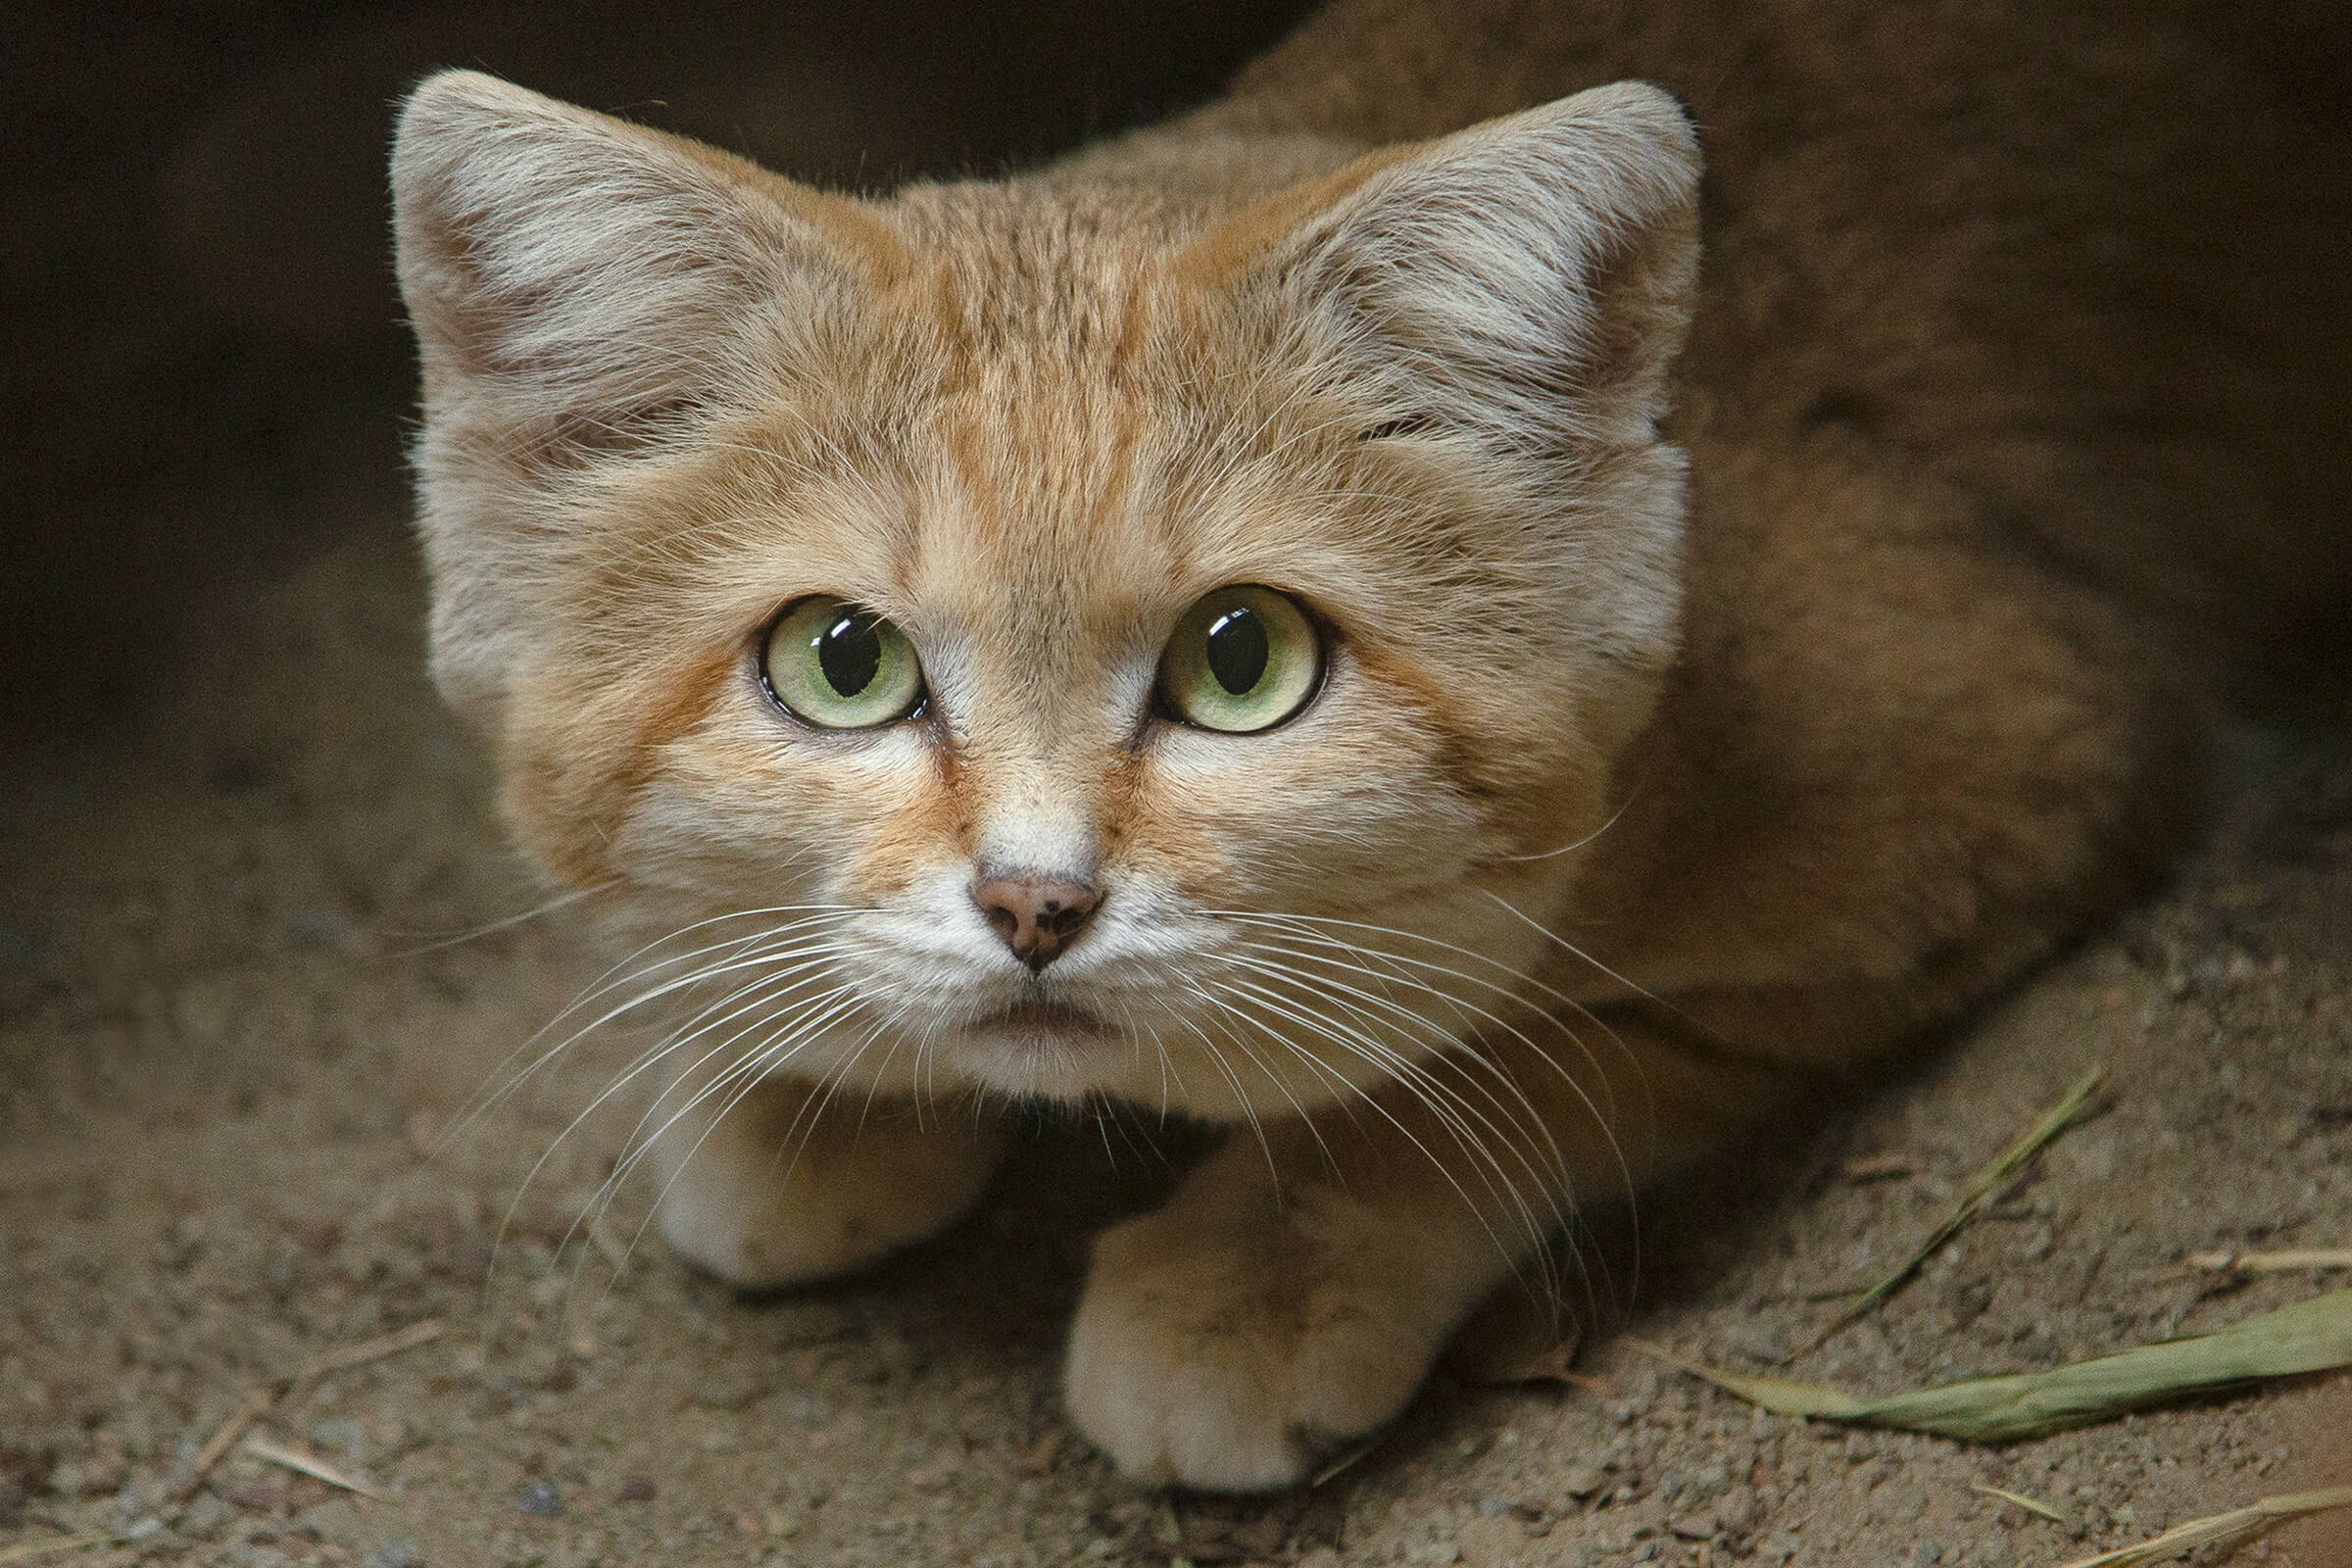 Sand Cats Use Their Ears To Hunt.